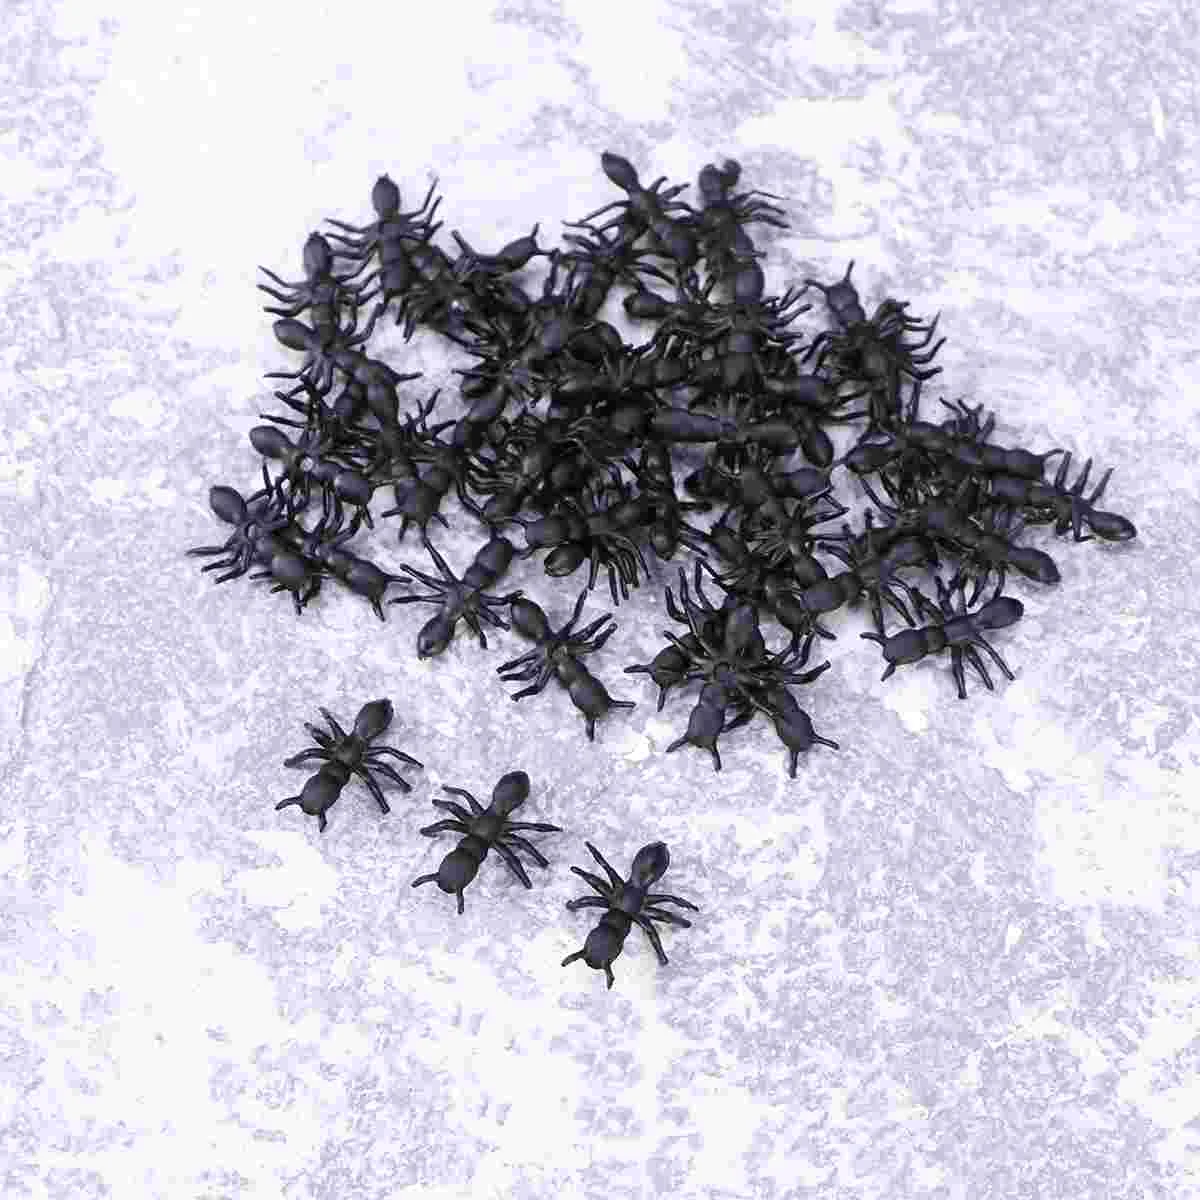 

50 Pcs Simulation Ants Insects Tricky Toy Toddler Toys Prank Halloween Child Kids